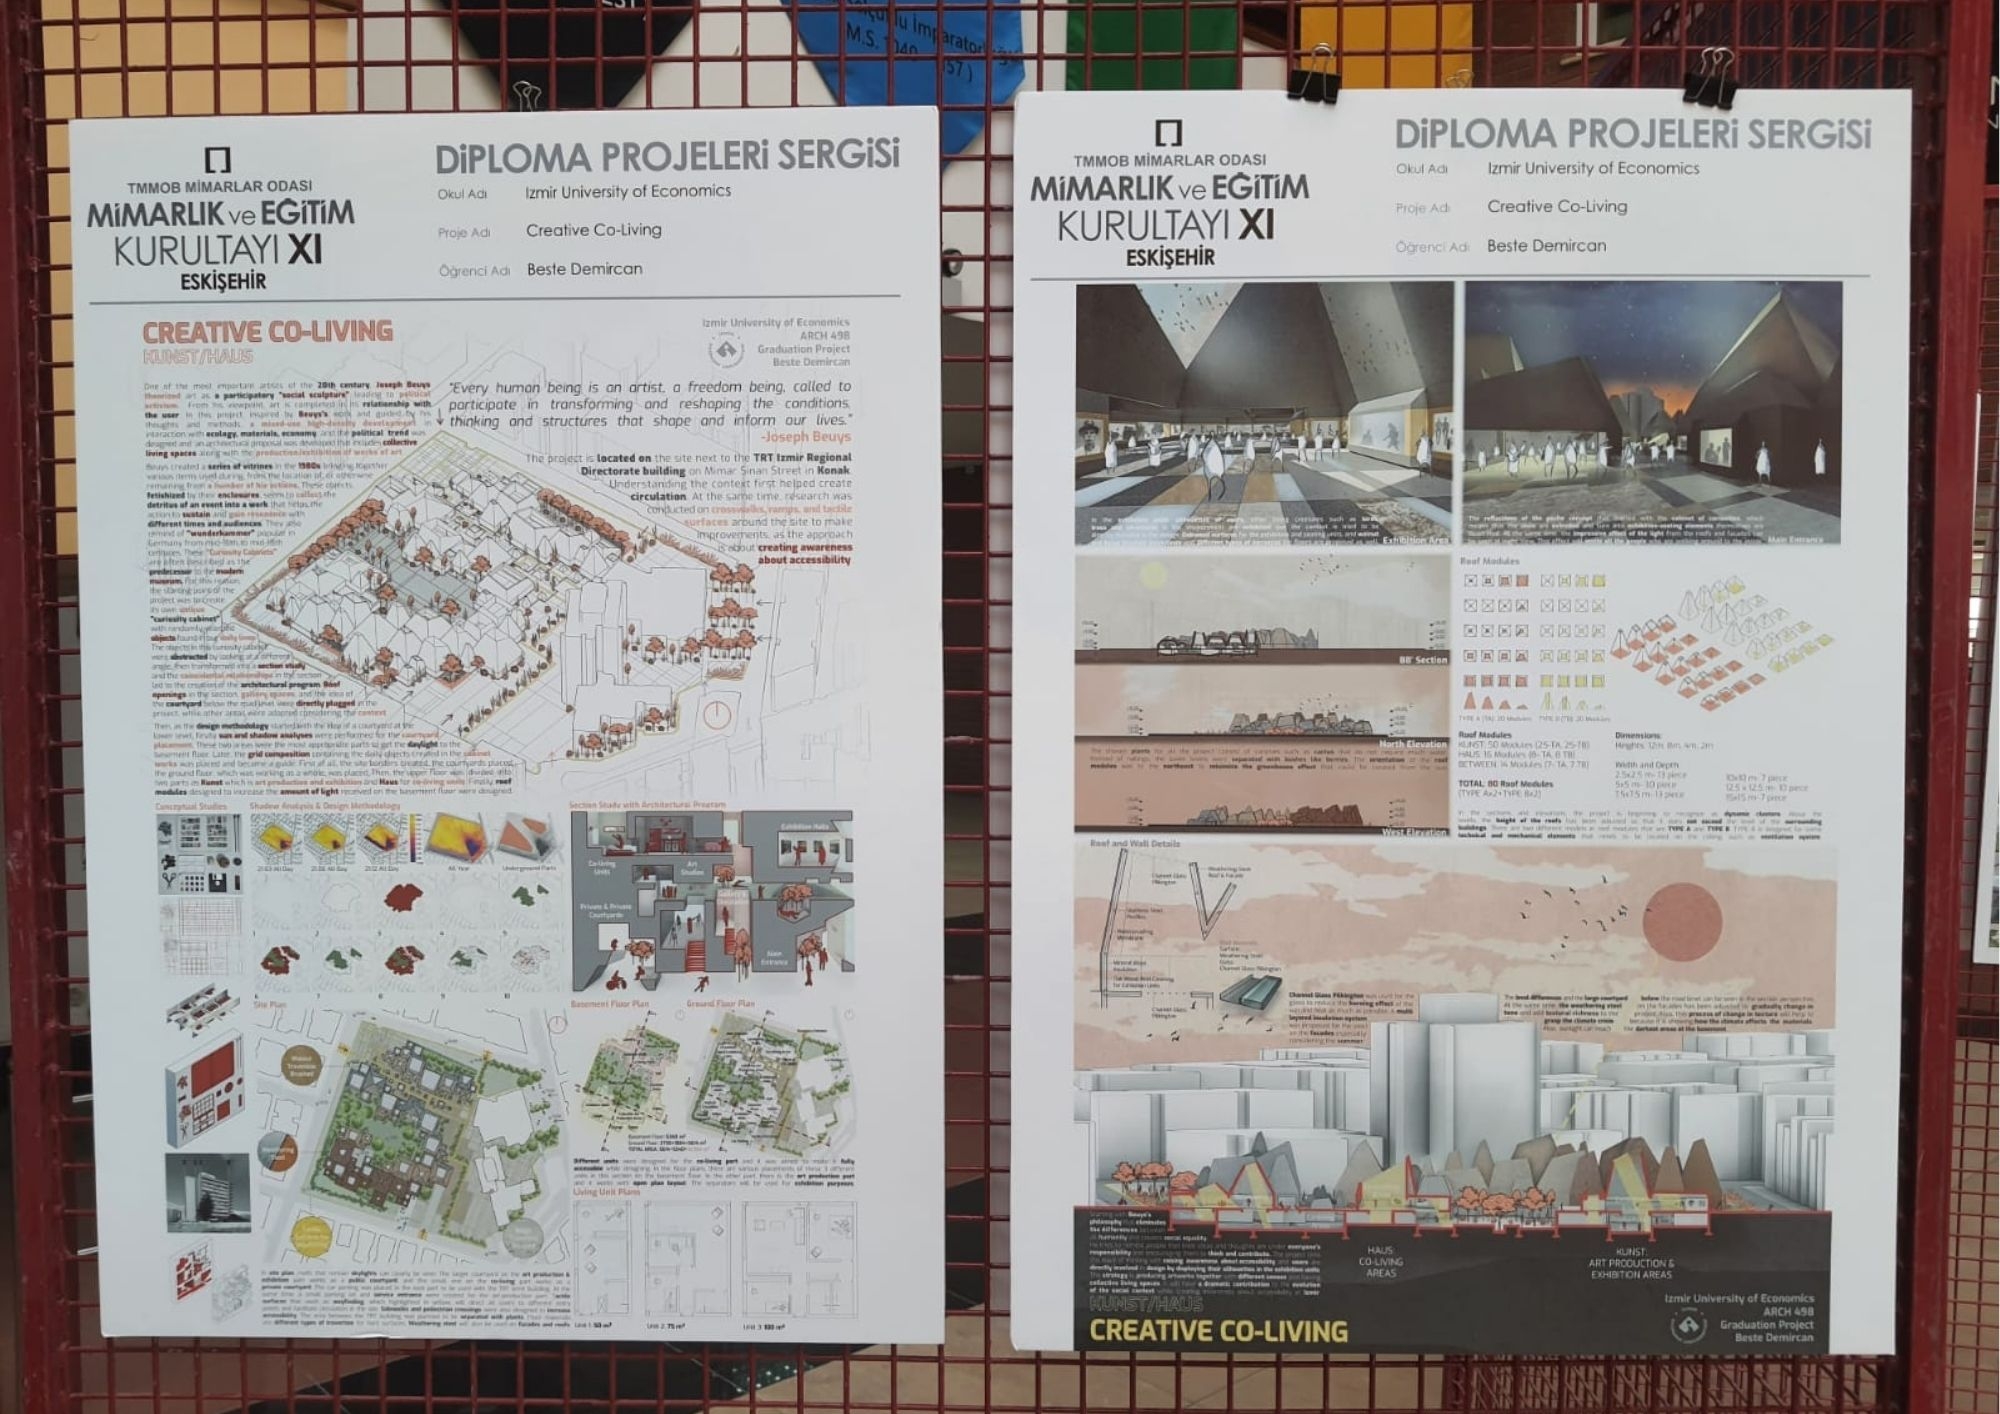 2 diploma projects from IUE to 6th Architecture and Education Congress